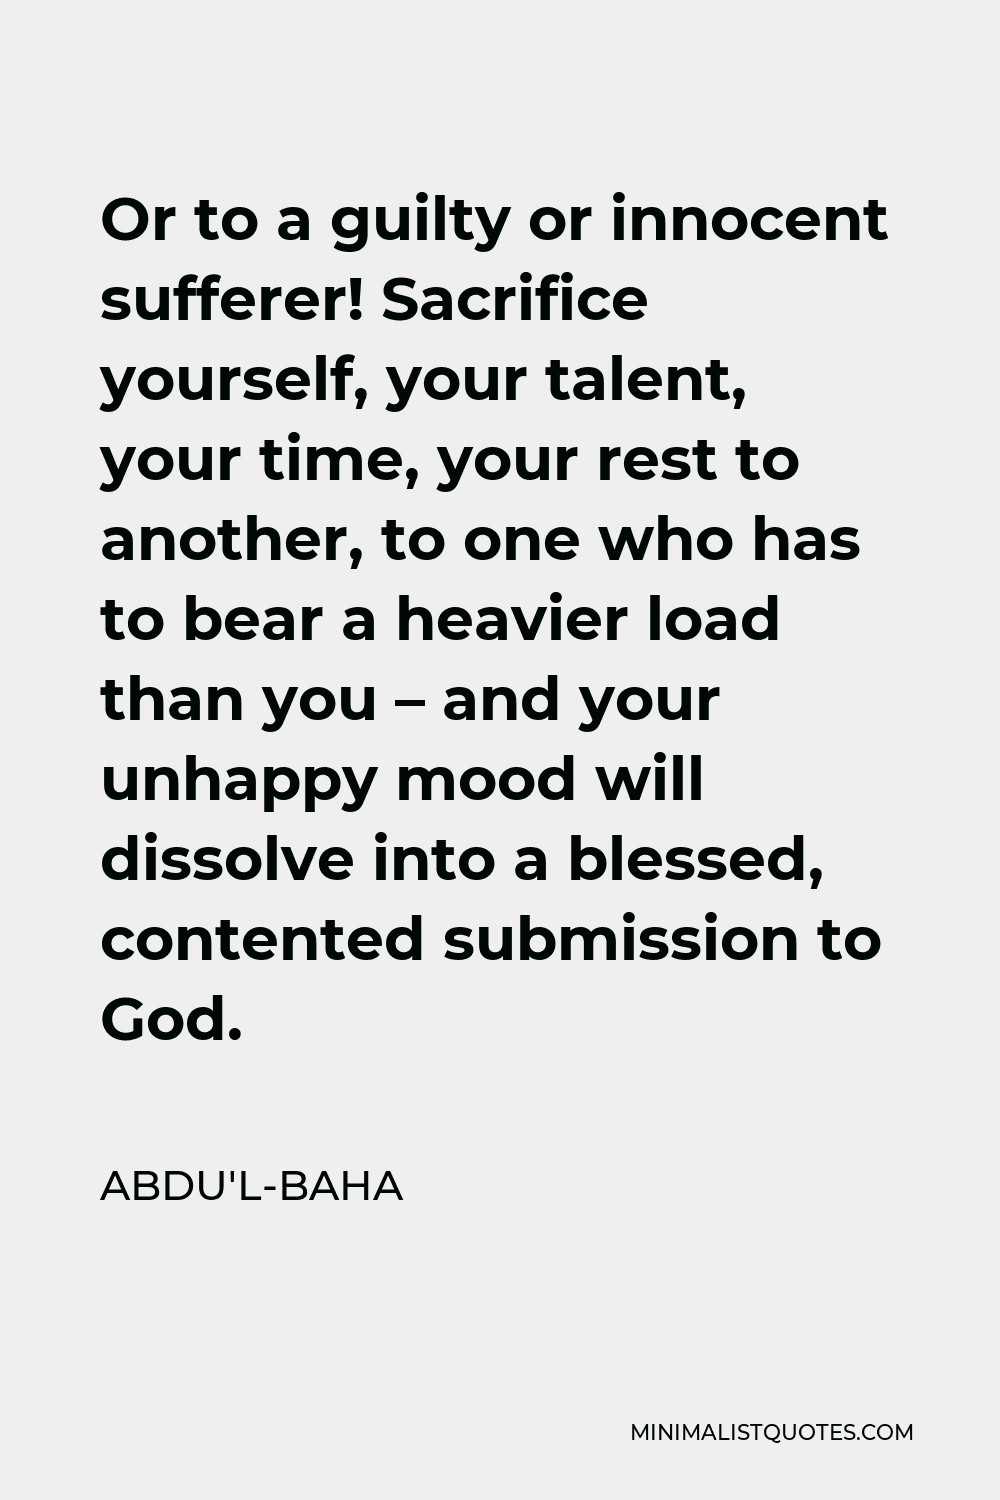 Abdu'l-Baha Quote - Or to a guilty or innocent sufferer! Sacrifice yourself, your talent, your time, your rest to another, to one who has to bear a heavier load than you – and your unhappy mood will dissolve into a blessed, contented submission to God.